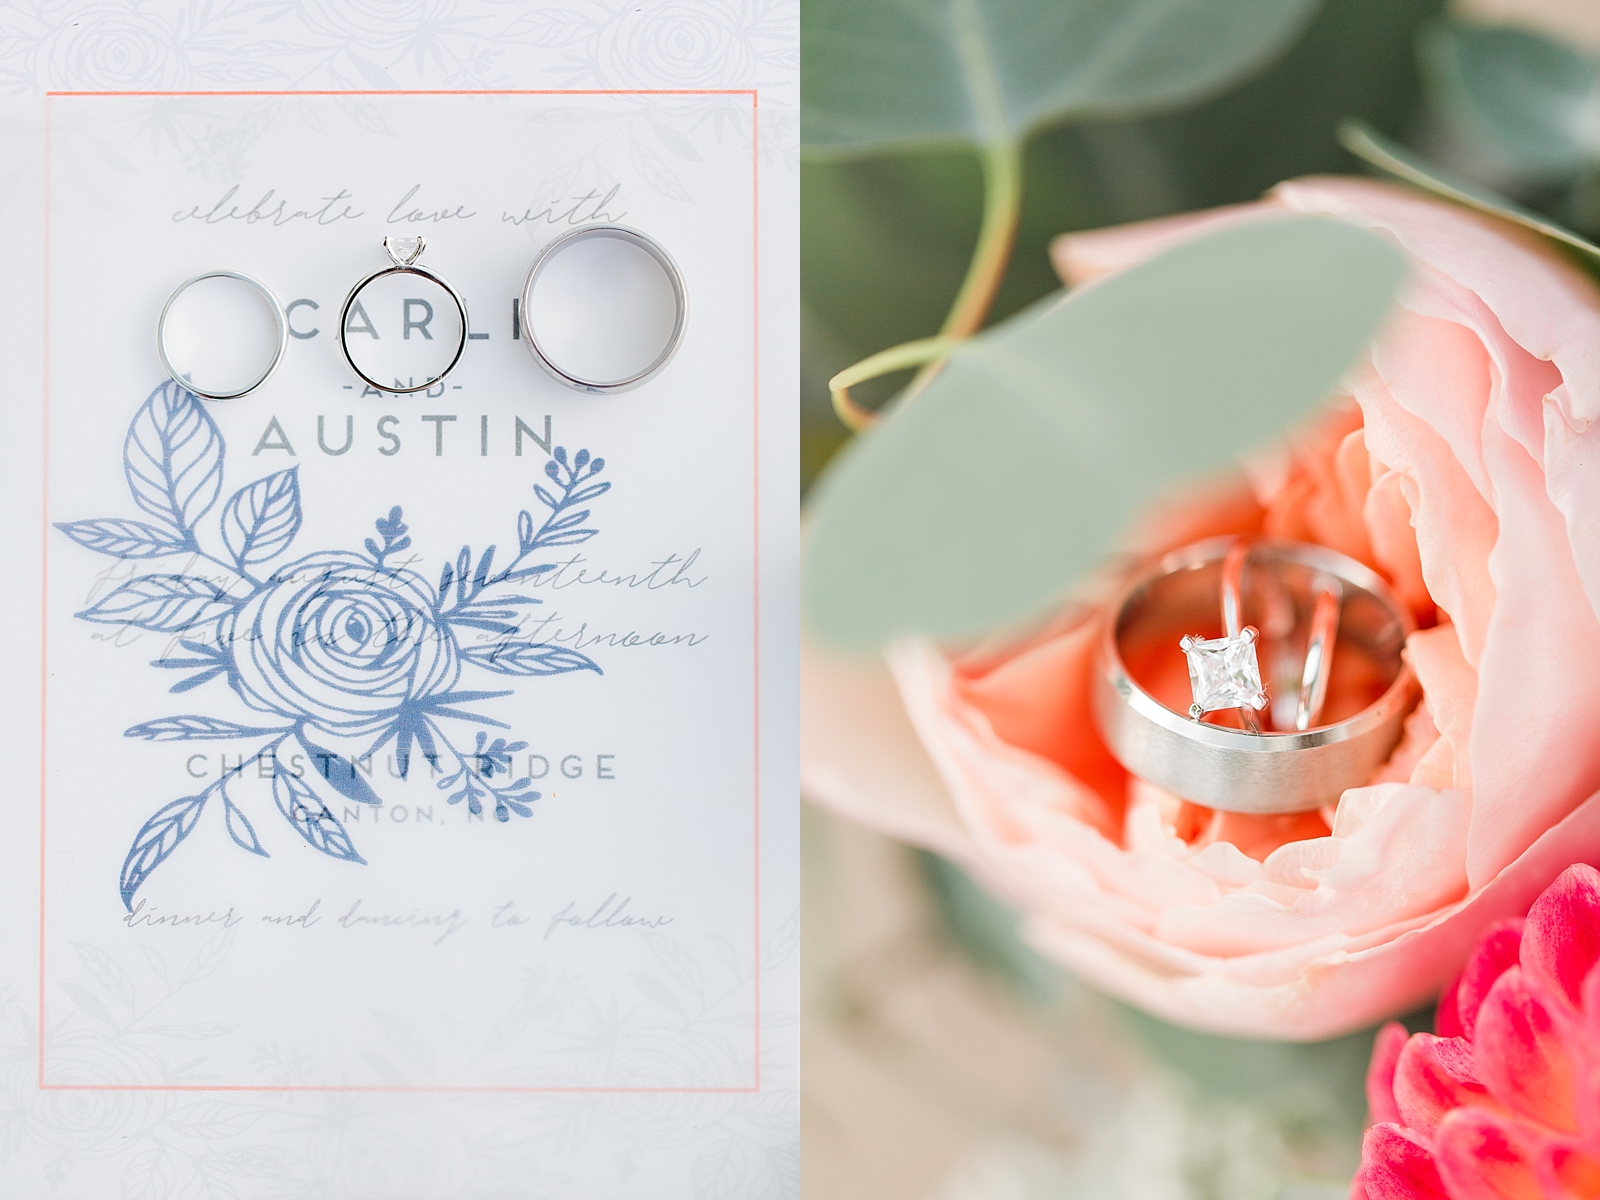 Chestnut Ridge Wedding invitation detail with wedding rings and wedding rings in pink flower detail photos